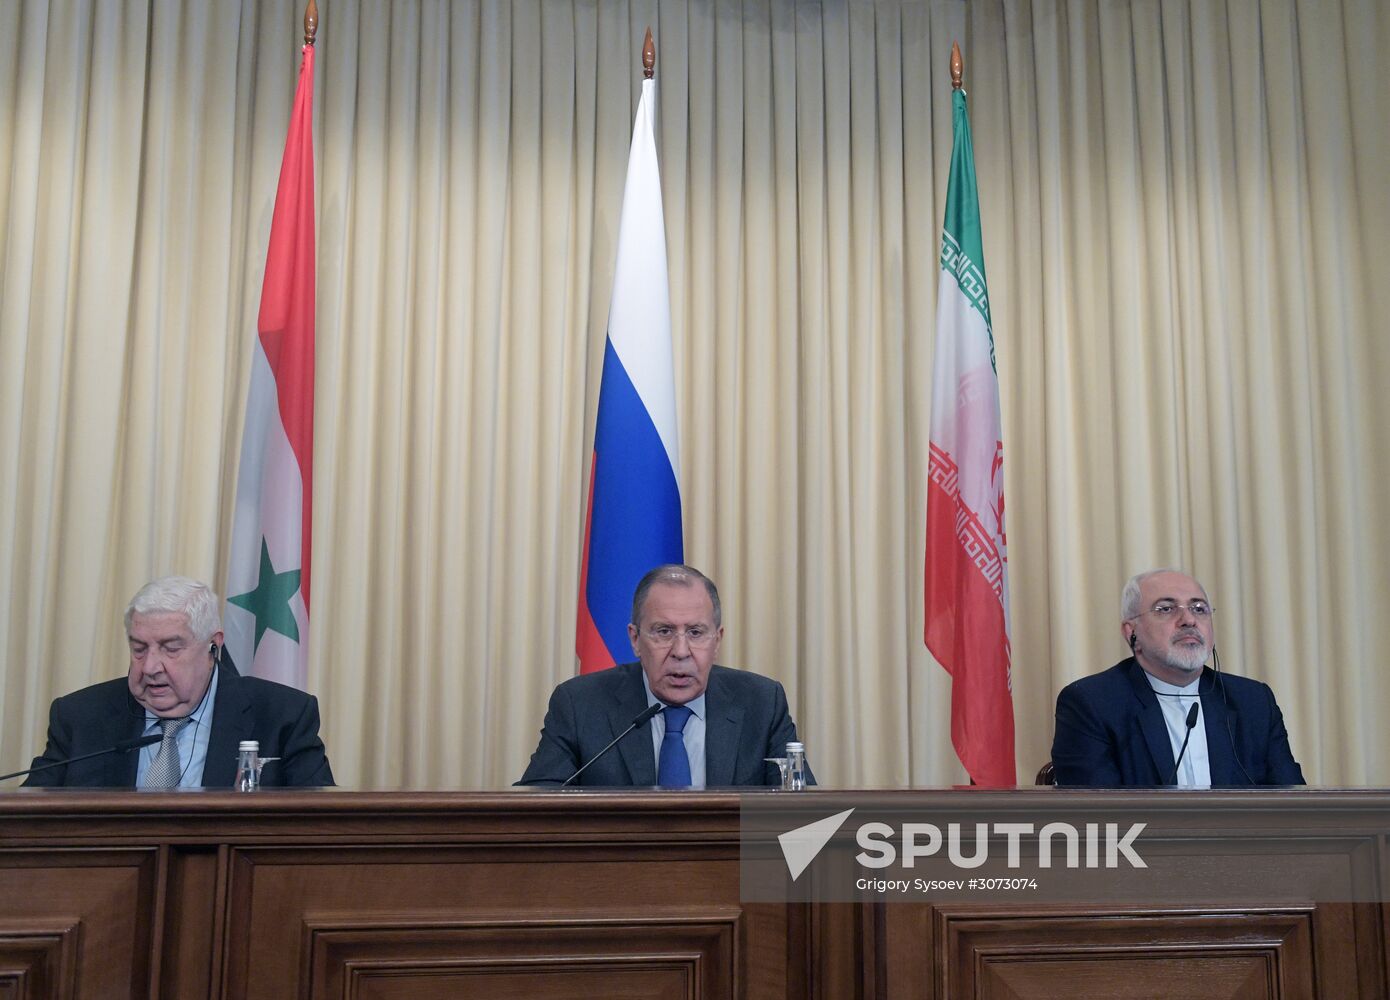 News conference of the Foreign Ministers of Russia, Iran and Syria